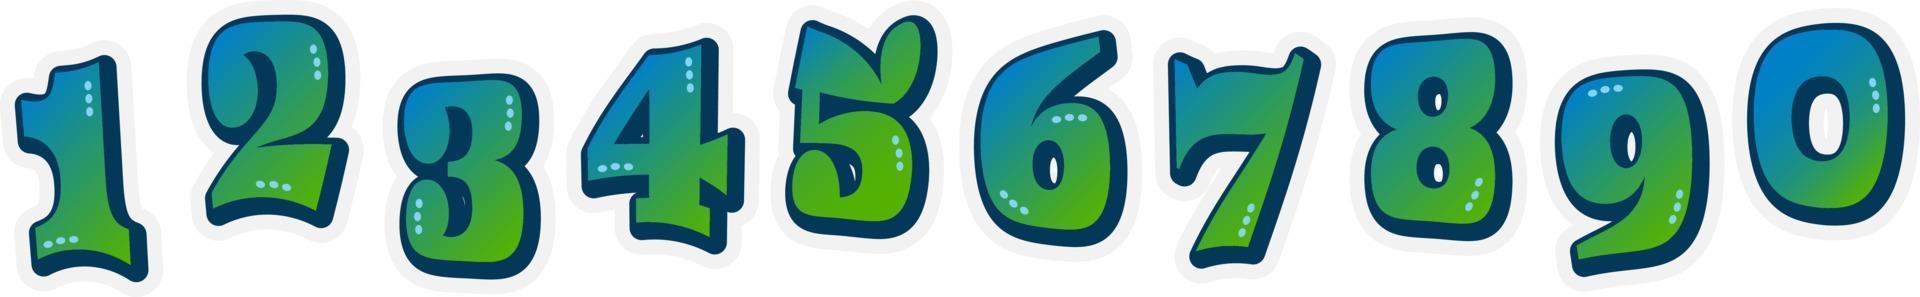 Graffiti Style Numbers Vector Set